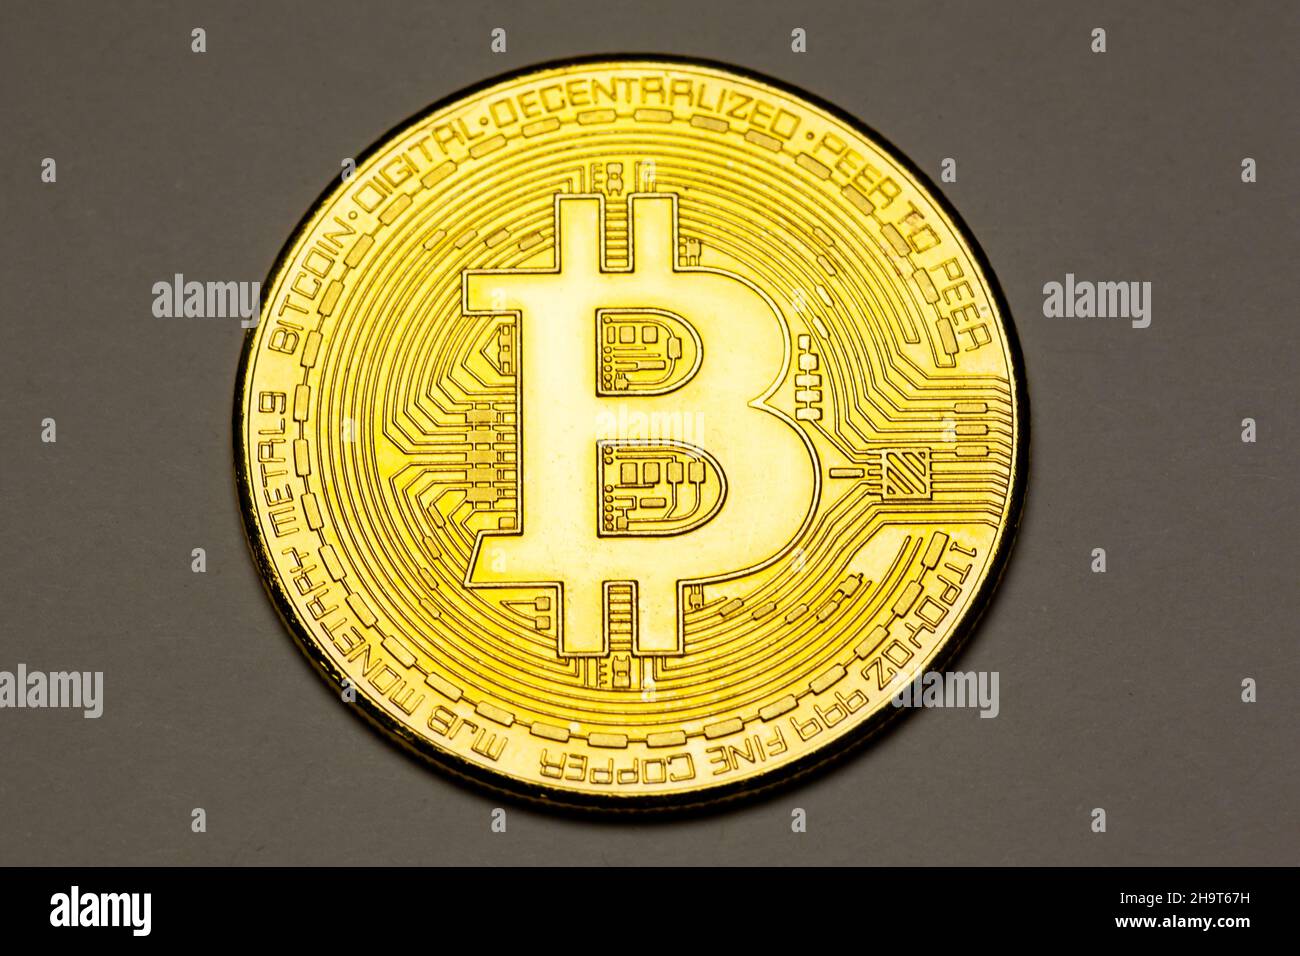 Bitcoin Cryptocurency coin. Stock Photo